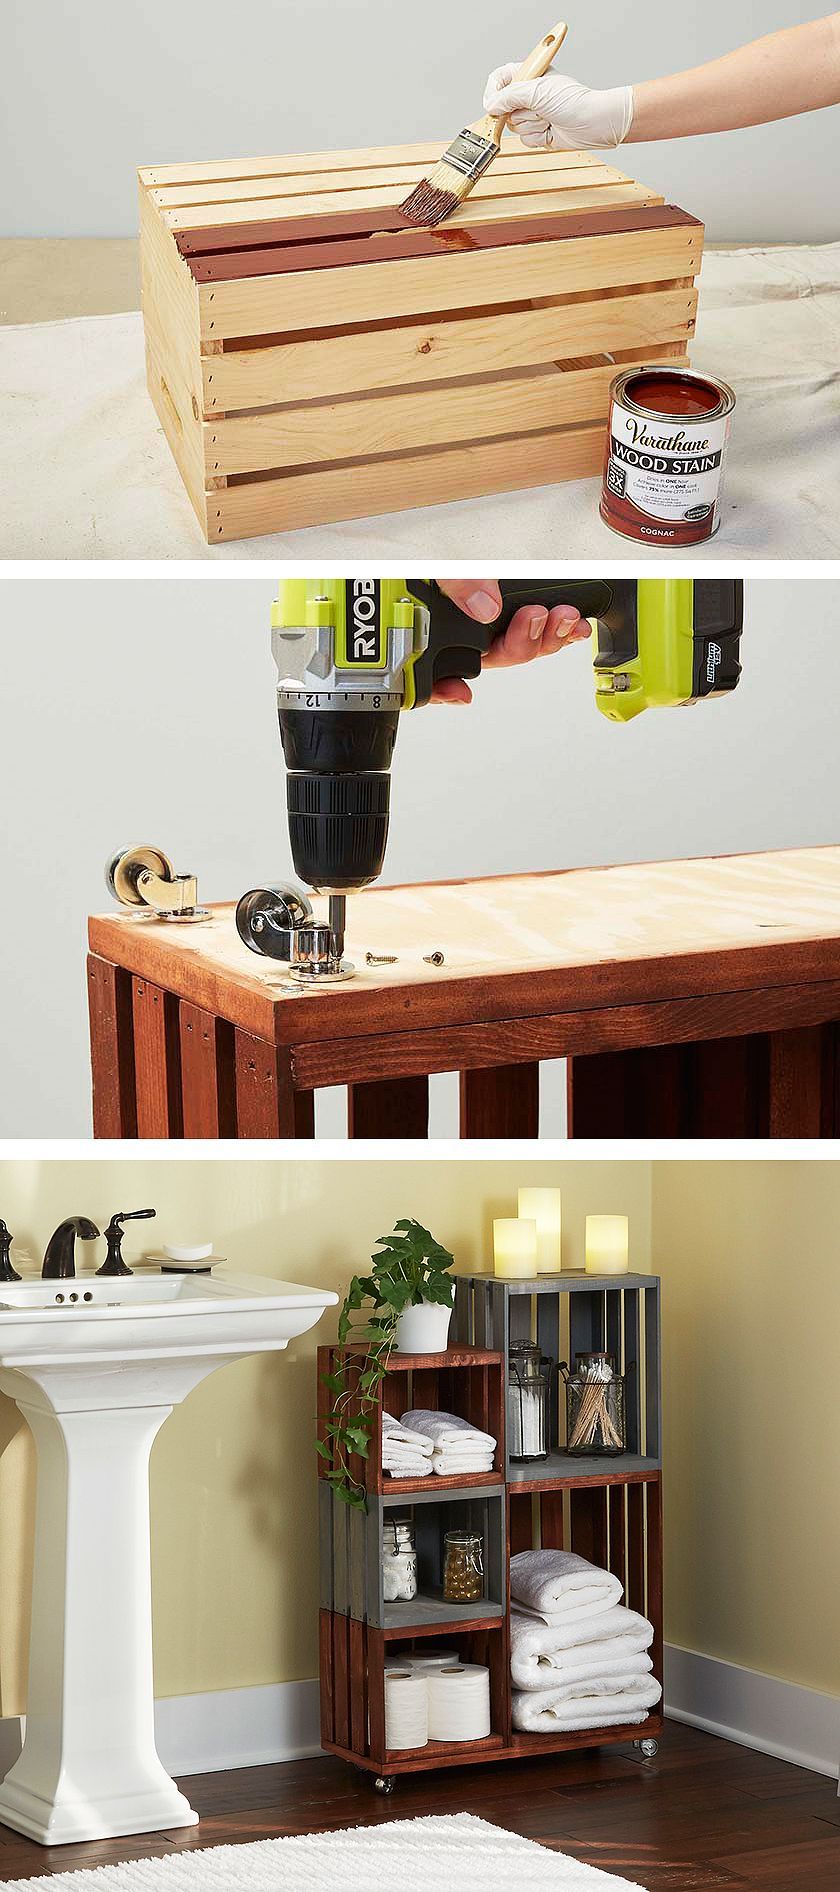 Turn ordinary wooden crates into cool bathroom storage on wheels. Just follow our step-by-step tutorial.